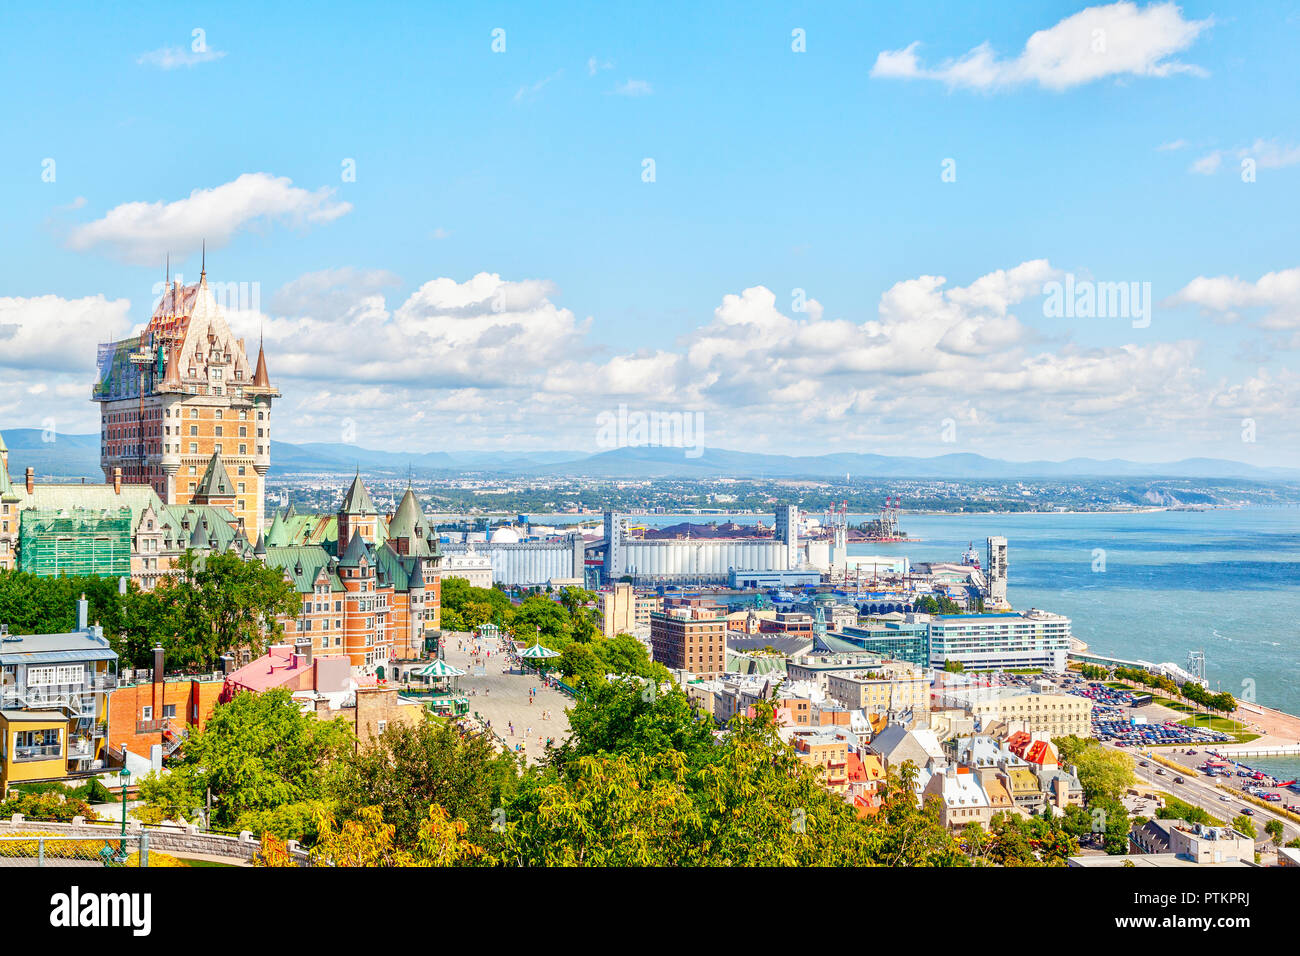 View of Old Quebec skyline and surrounding landscape with Chateau Frontenac, Dufferin Terrace boardwalk and the Saint Lawrence River in Quebec City, Q Stock Photo